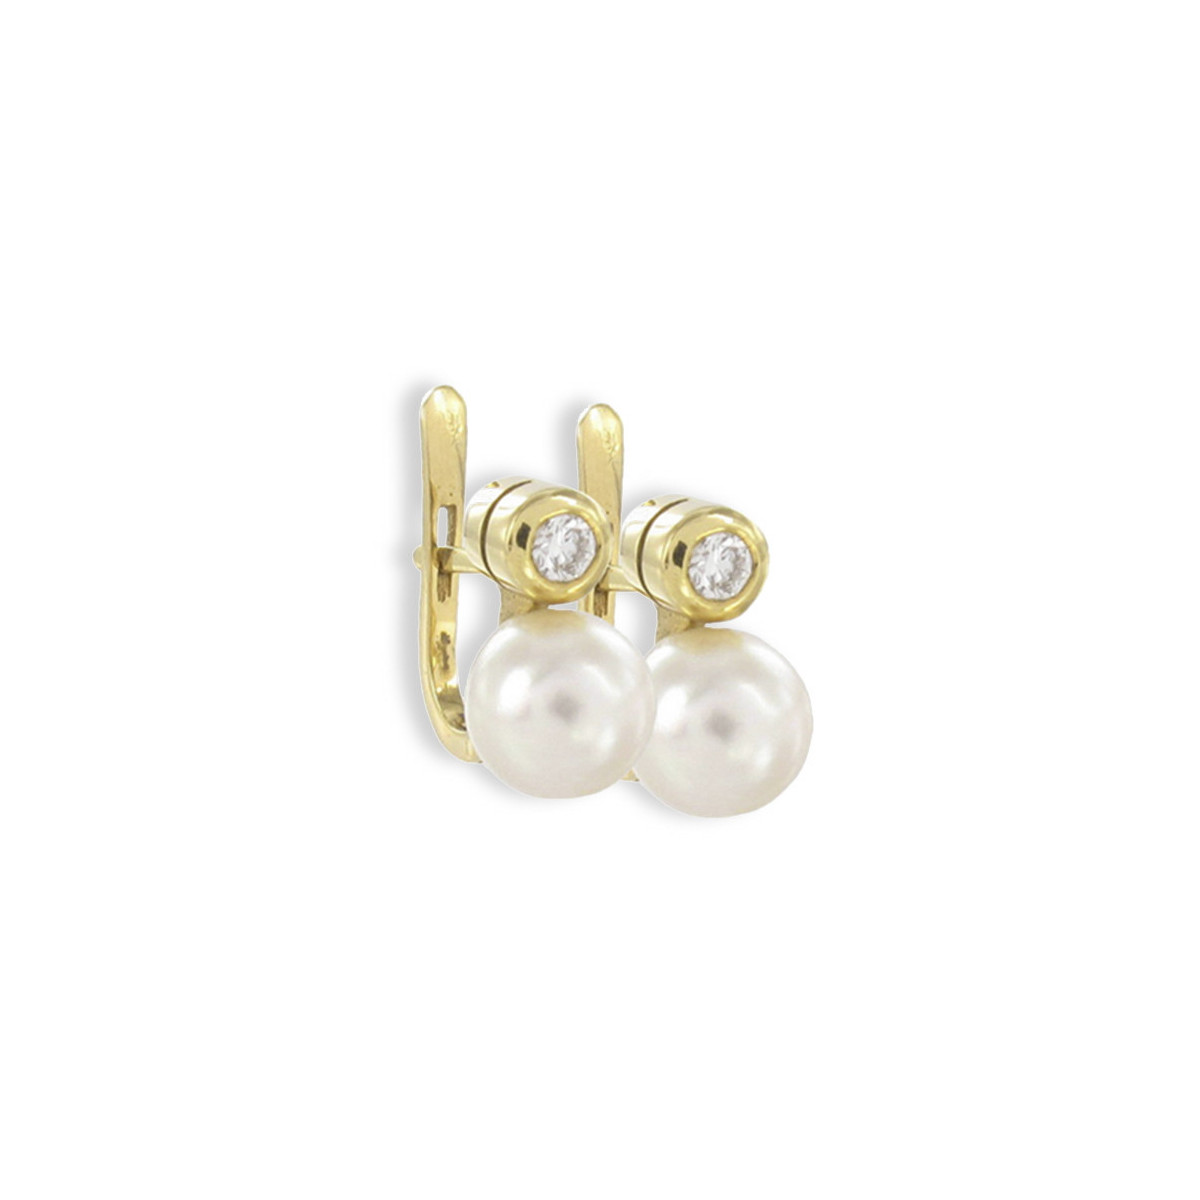 YOU AND ME GOLD PEARL AND DIAMOND EARRINGS